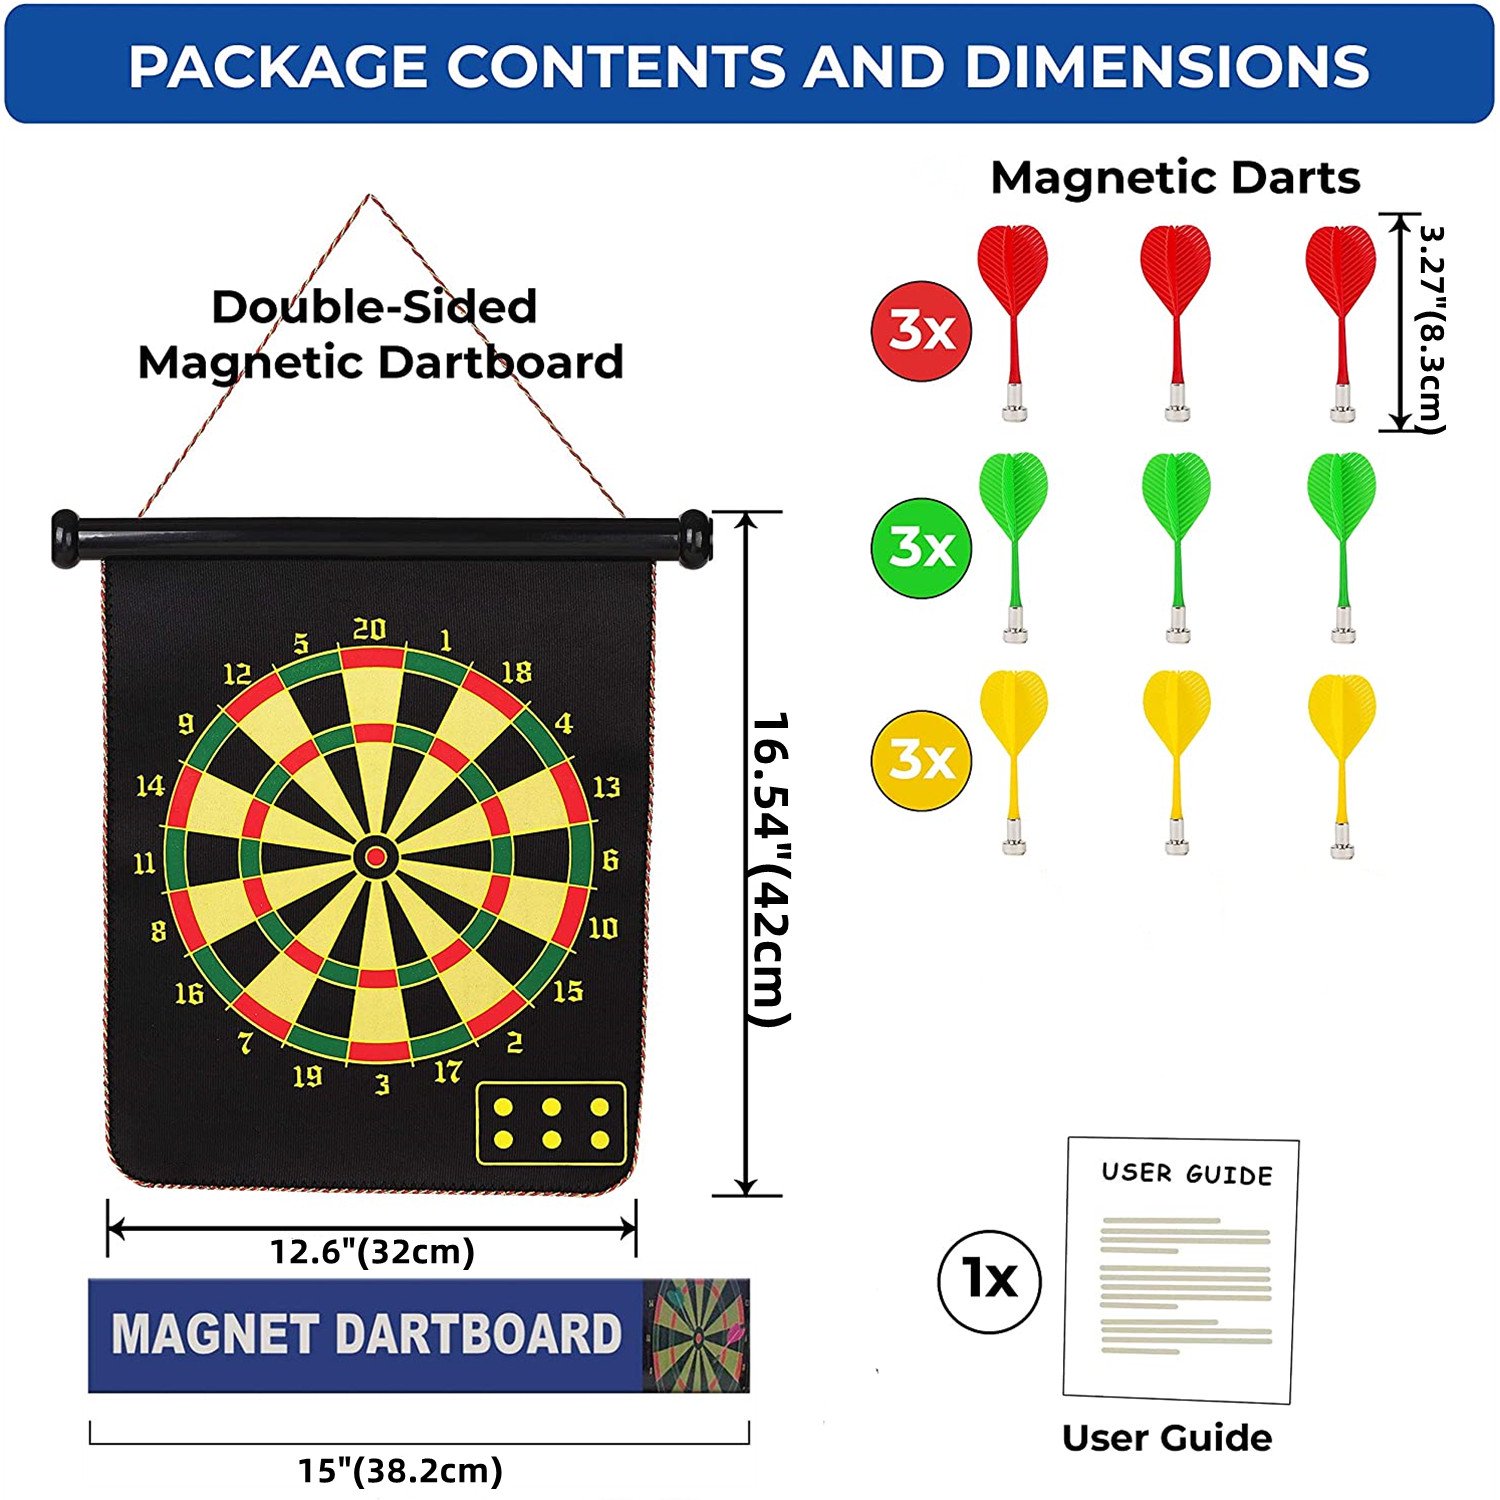 "Magnetic Dart Board, Happiwiz Safe Party Games Indoor Outdoor, Cool Toy Gifts for 5 6 7 8 9 10 11 12 13 Year Old Boy, Double-Sided, 9pcs Safe Darts, Easily Hangs Anywhere" - image 3 of 7